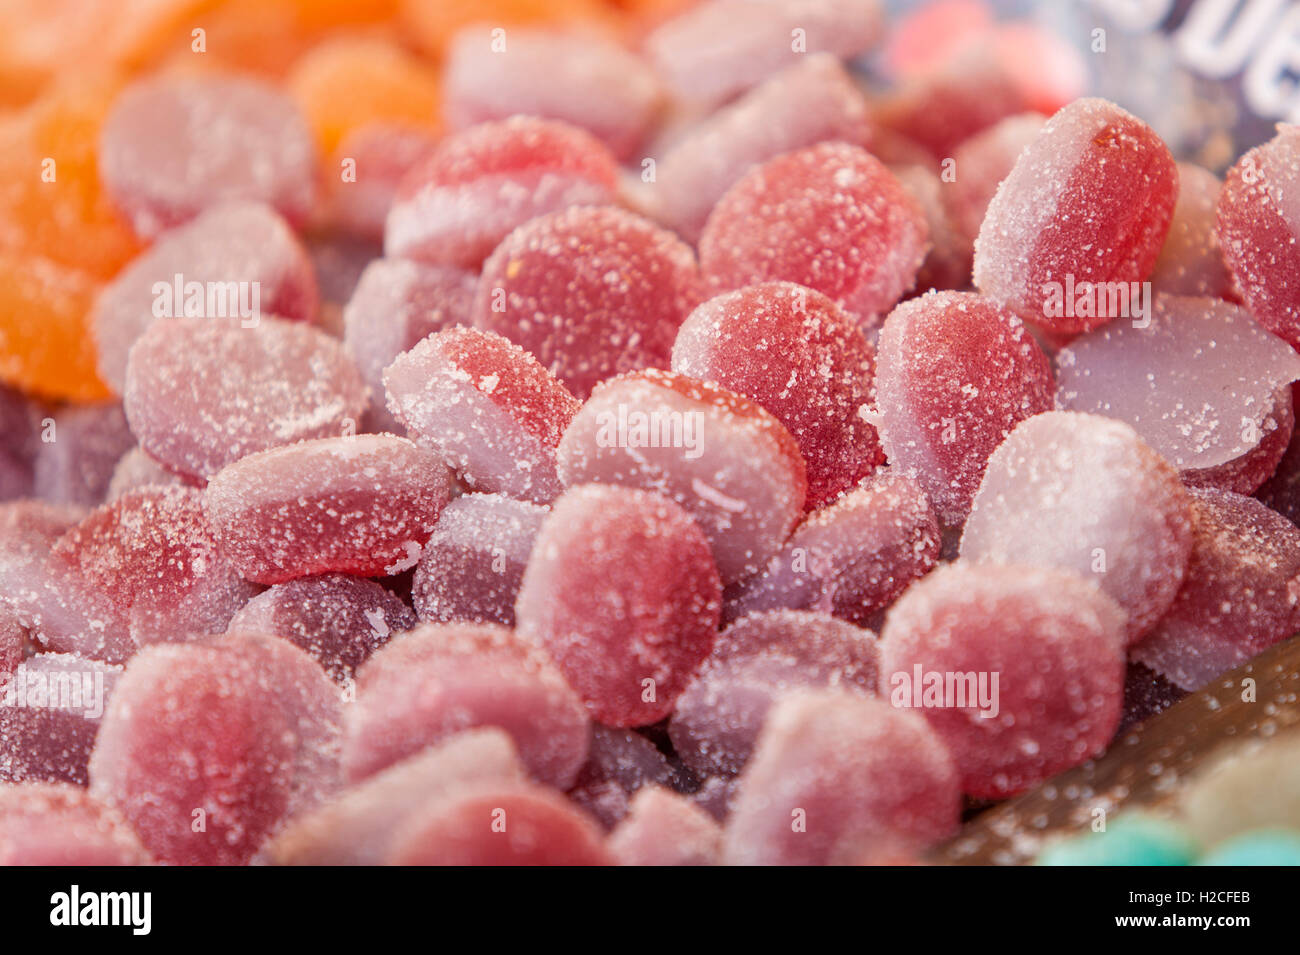 Berries of the forest sweet jellies at street market stall Stock Photo